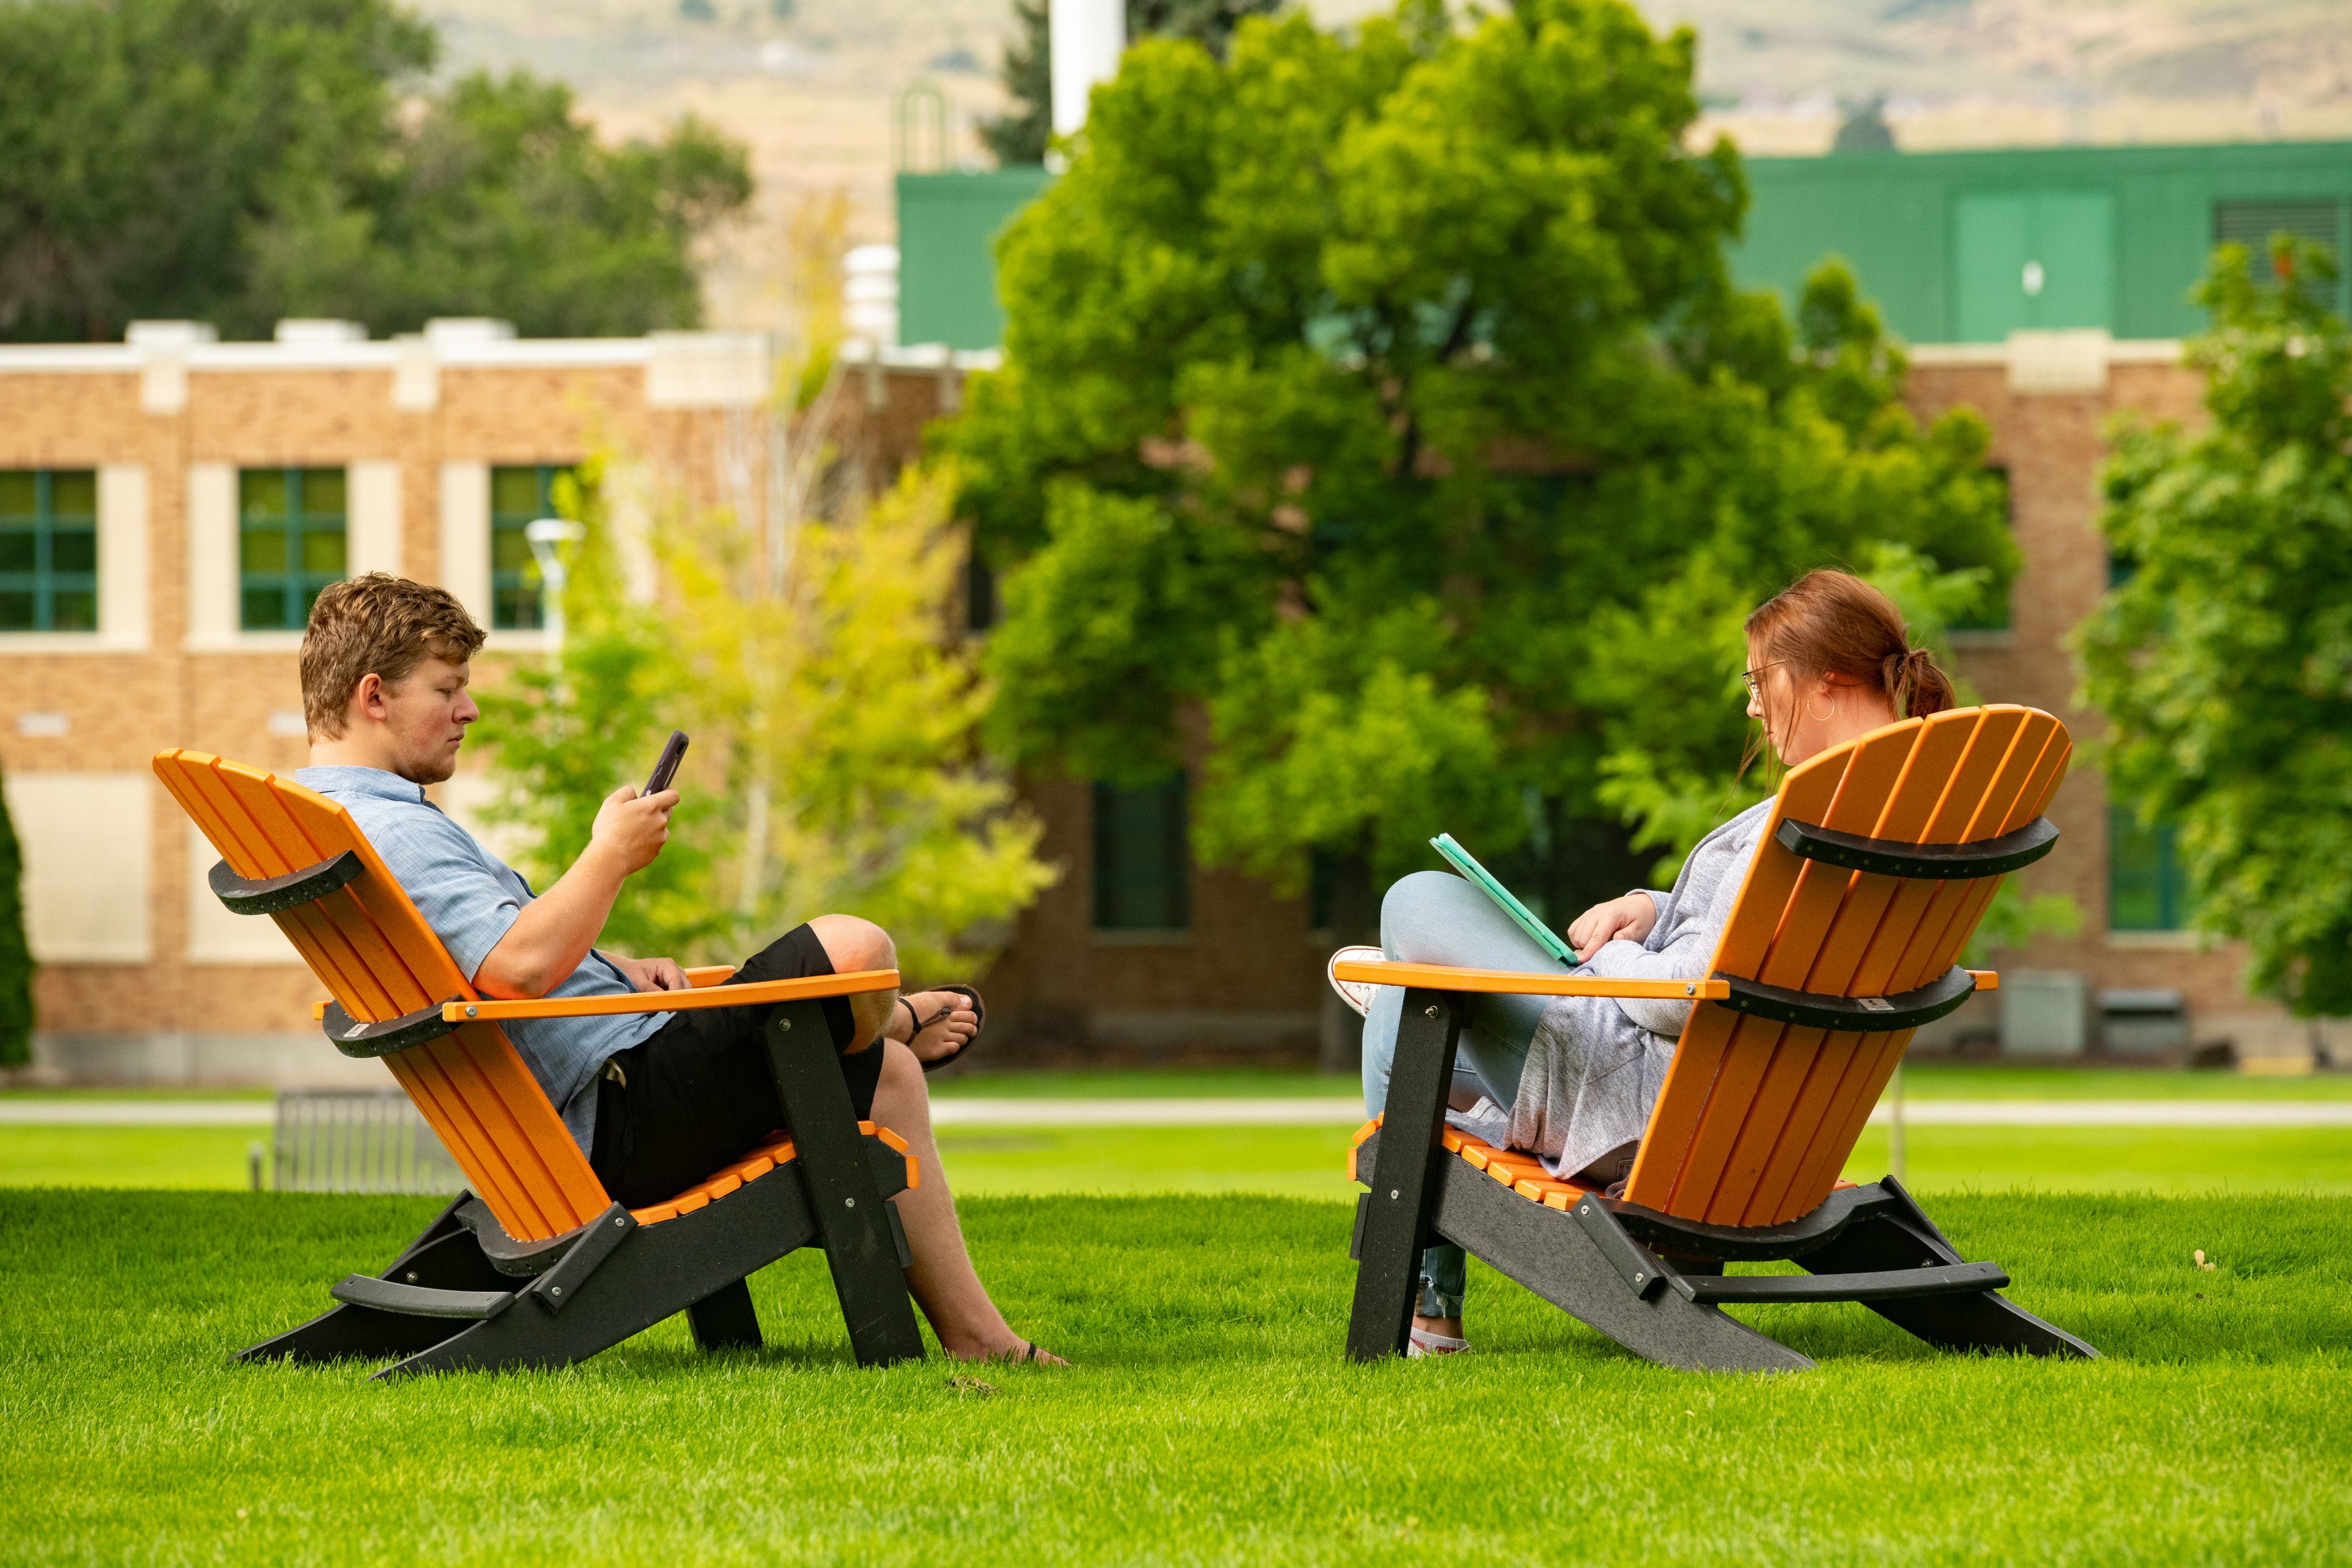 Students talking in lawn chairs on the quad.